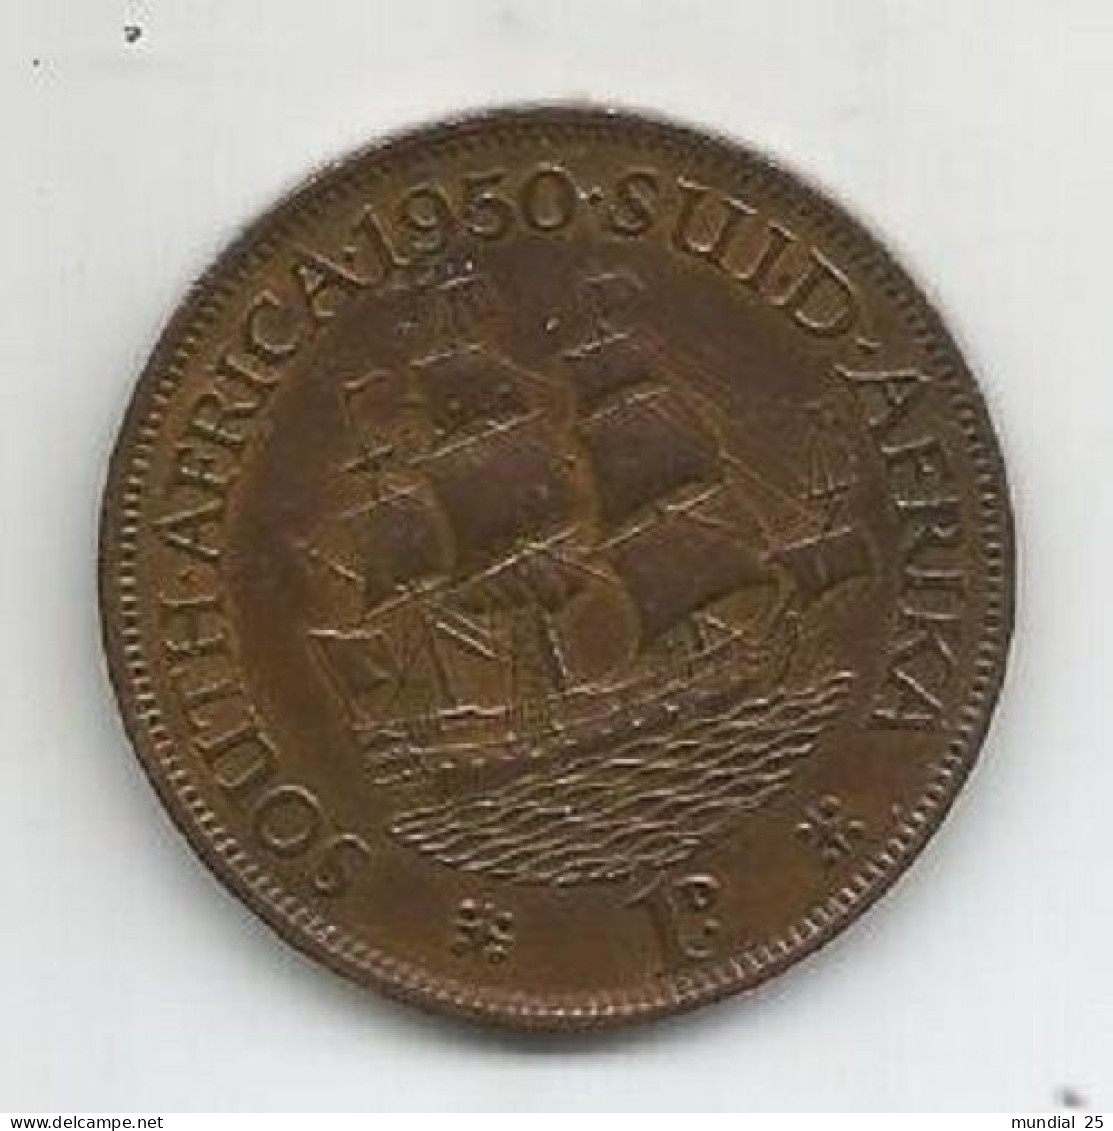 SOUTH AFRICA 1 PENNY 1950 - Sud Africa